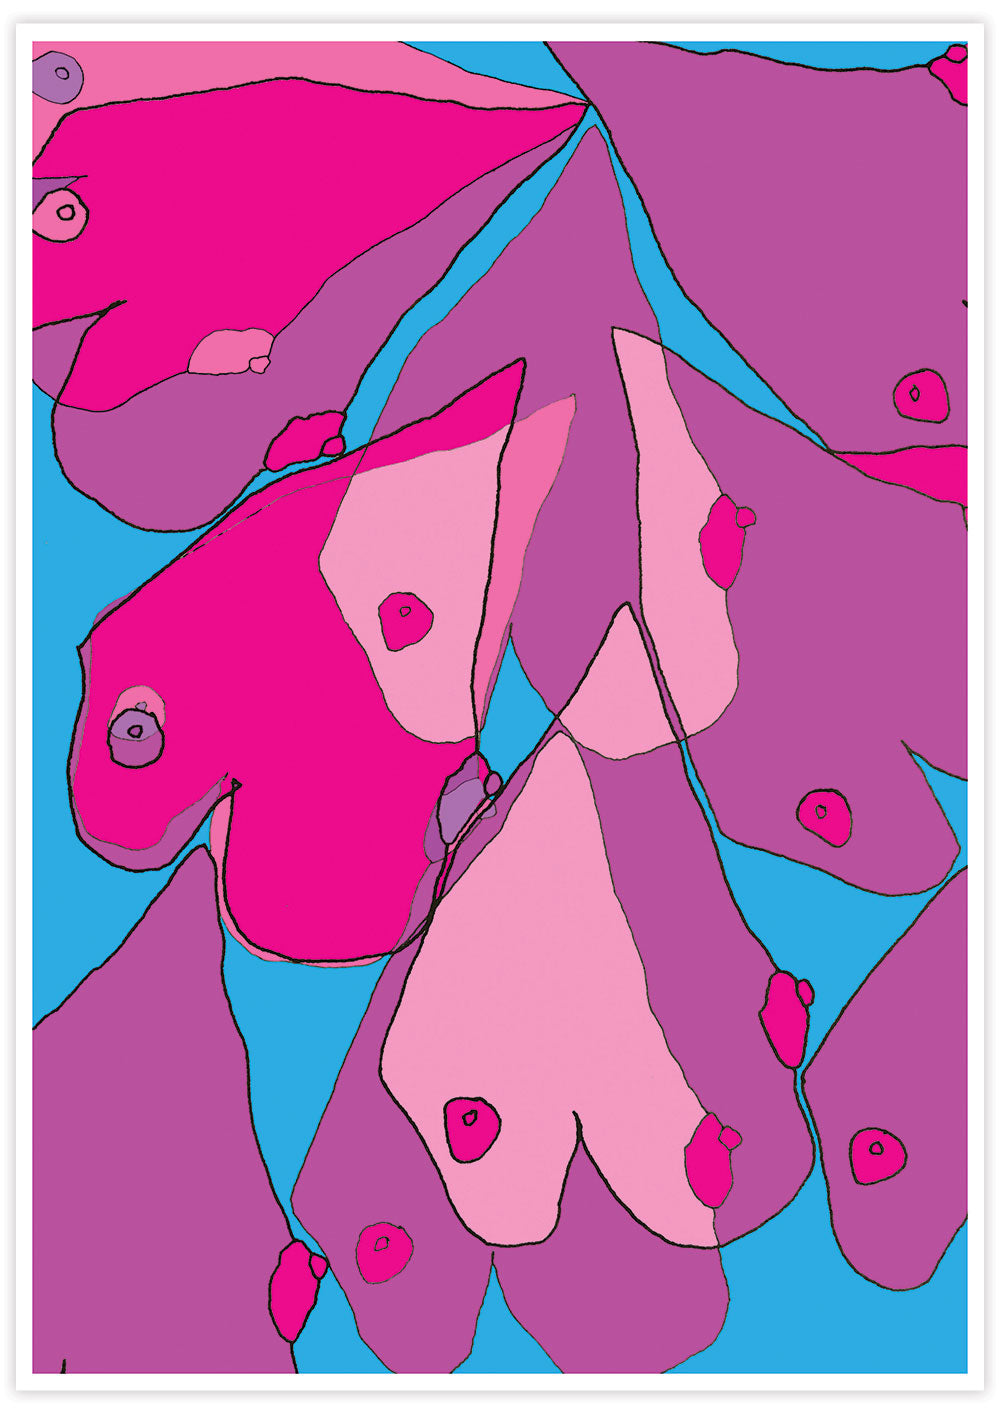 Tits Up Nude Abstract Illustration no frame